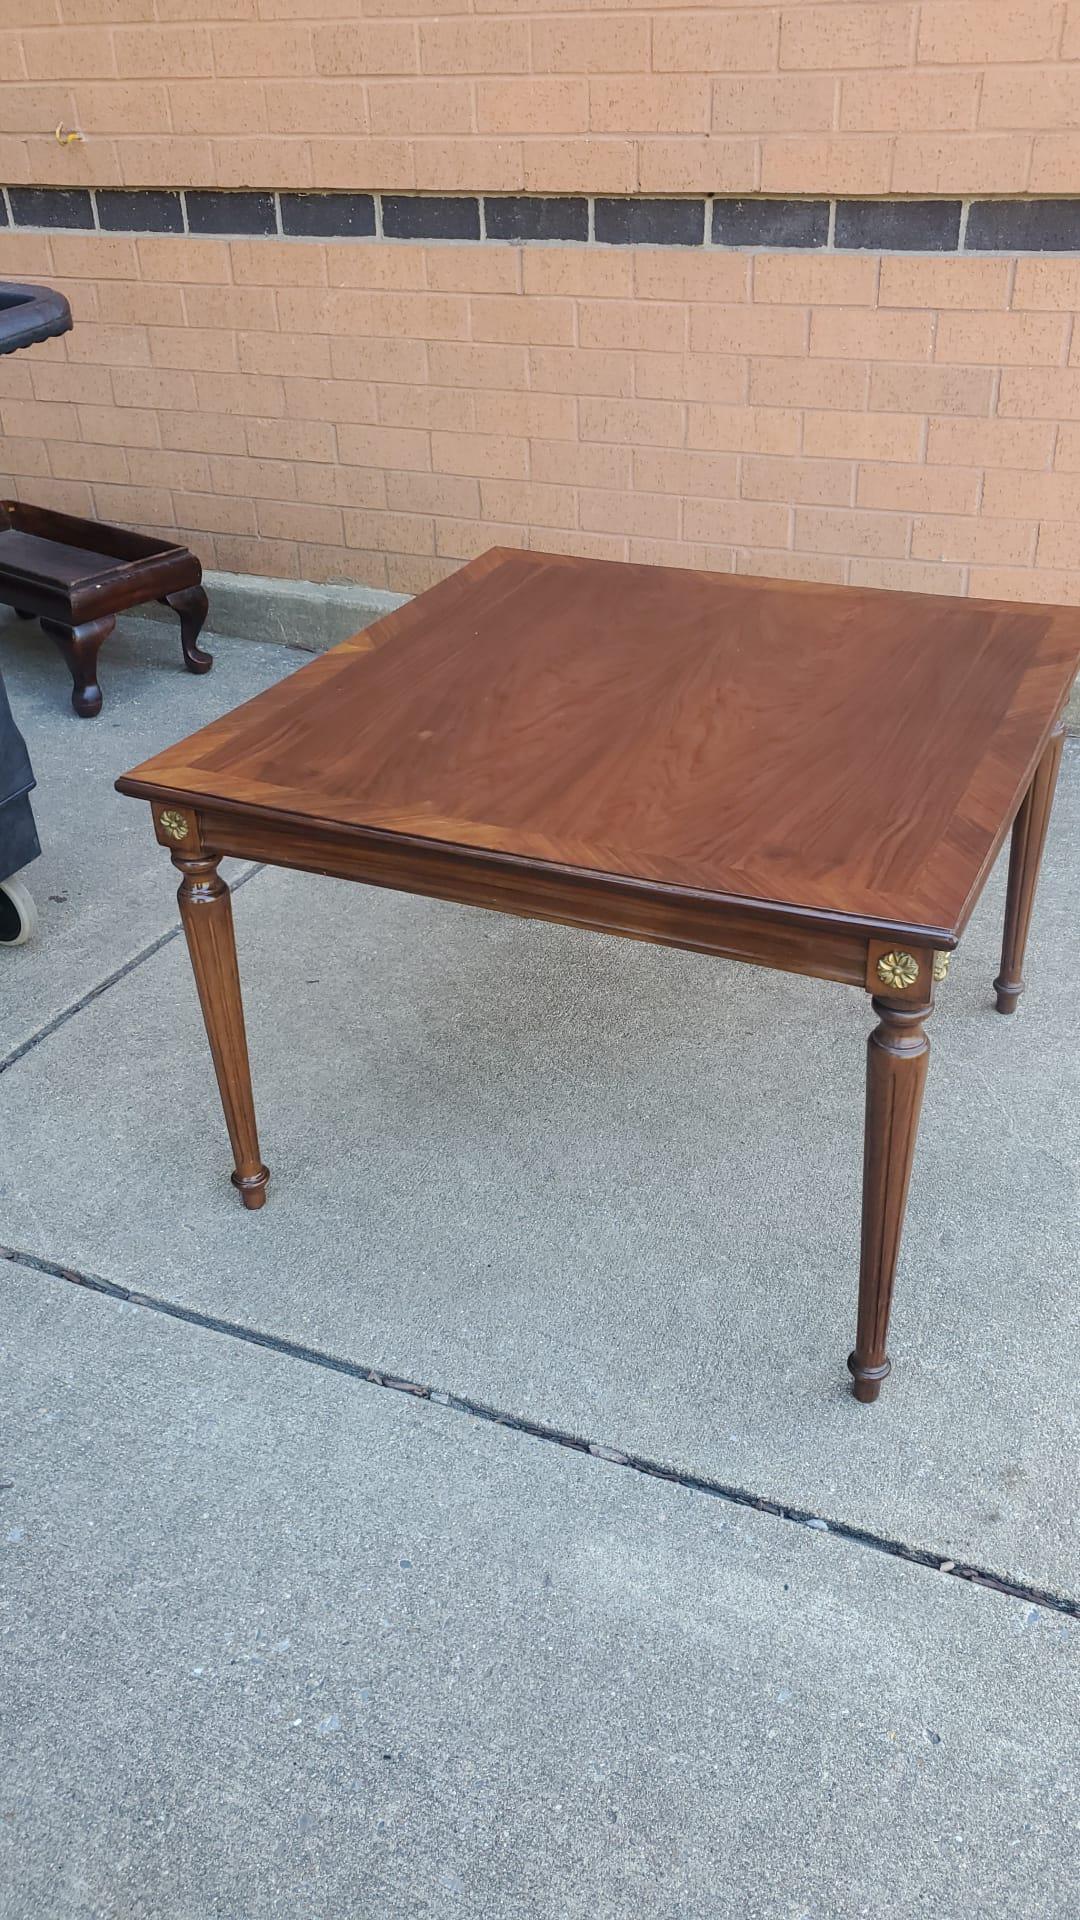 20th Century Georgian Style Mahogany Coffee Table In Good Condition For Sale In Germantown, MD